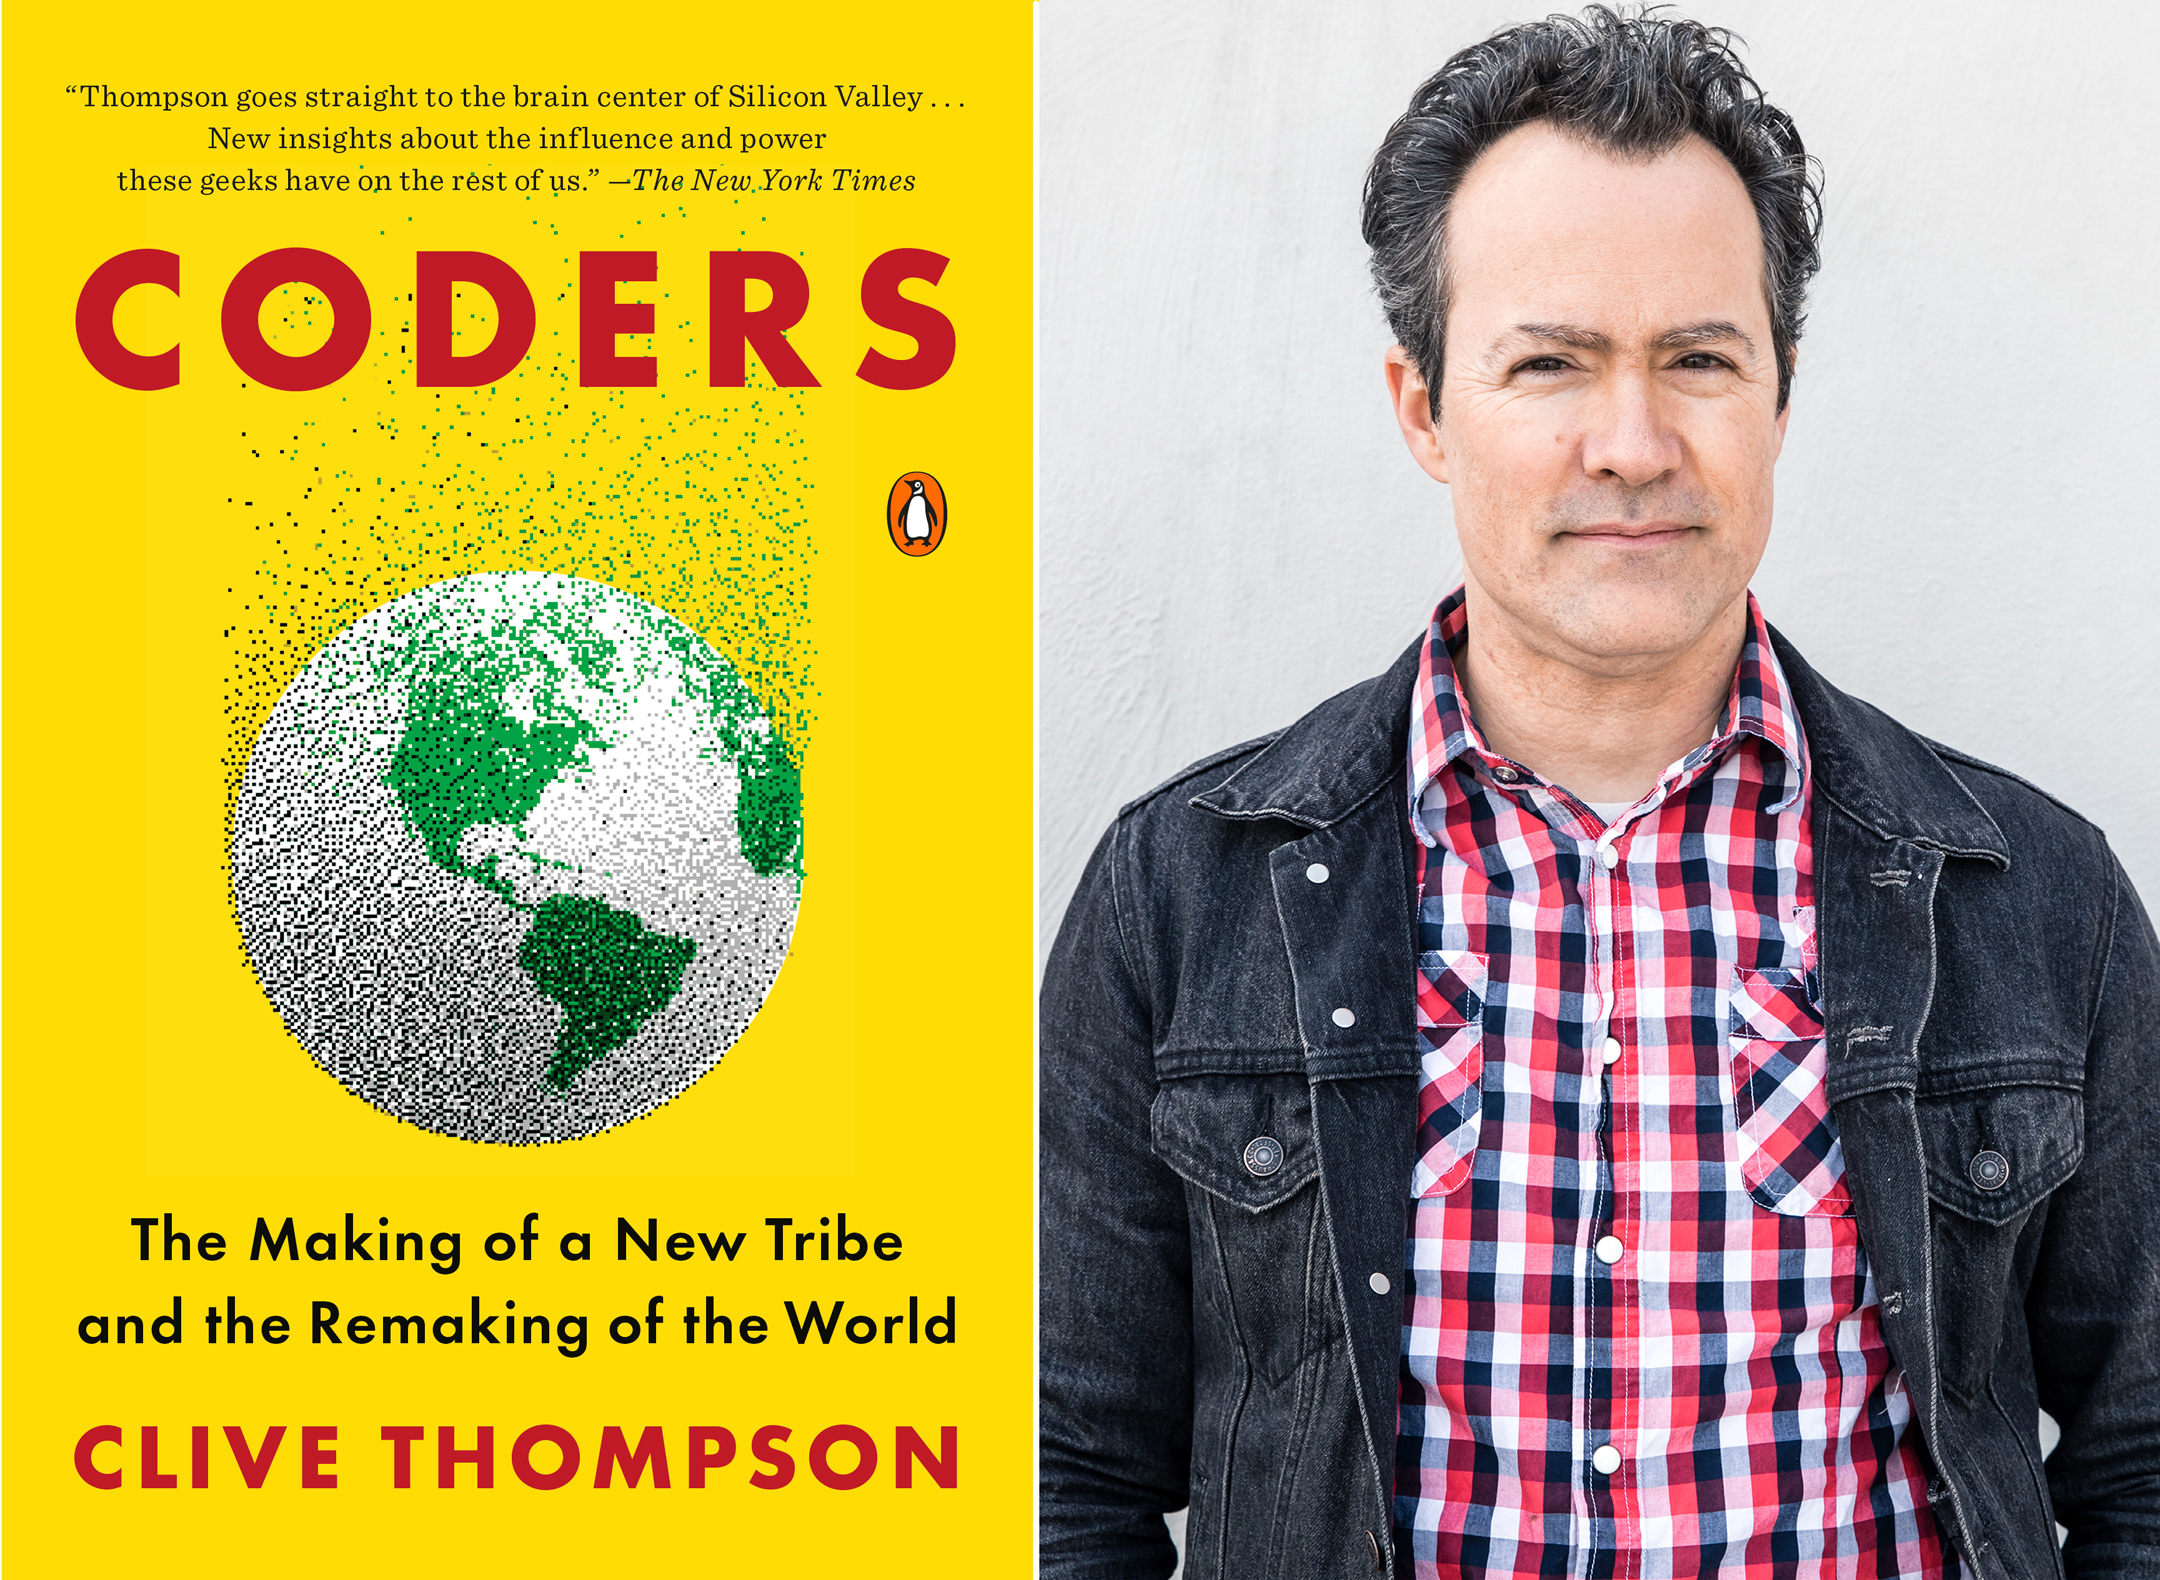 the cover of the book coders on the left, next to a photo of author clive thompson on the right